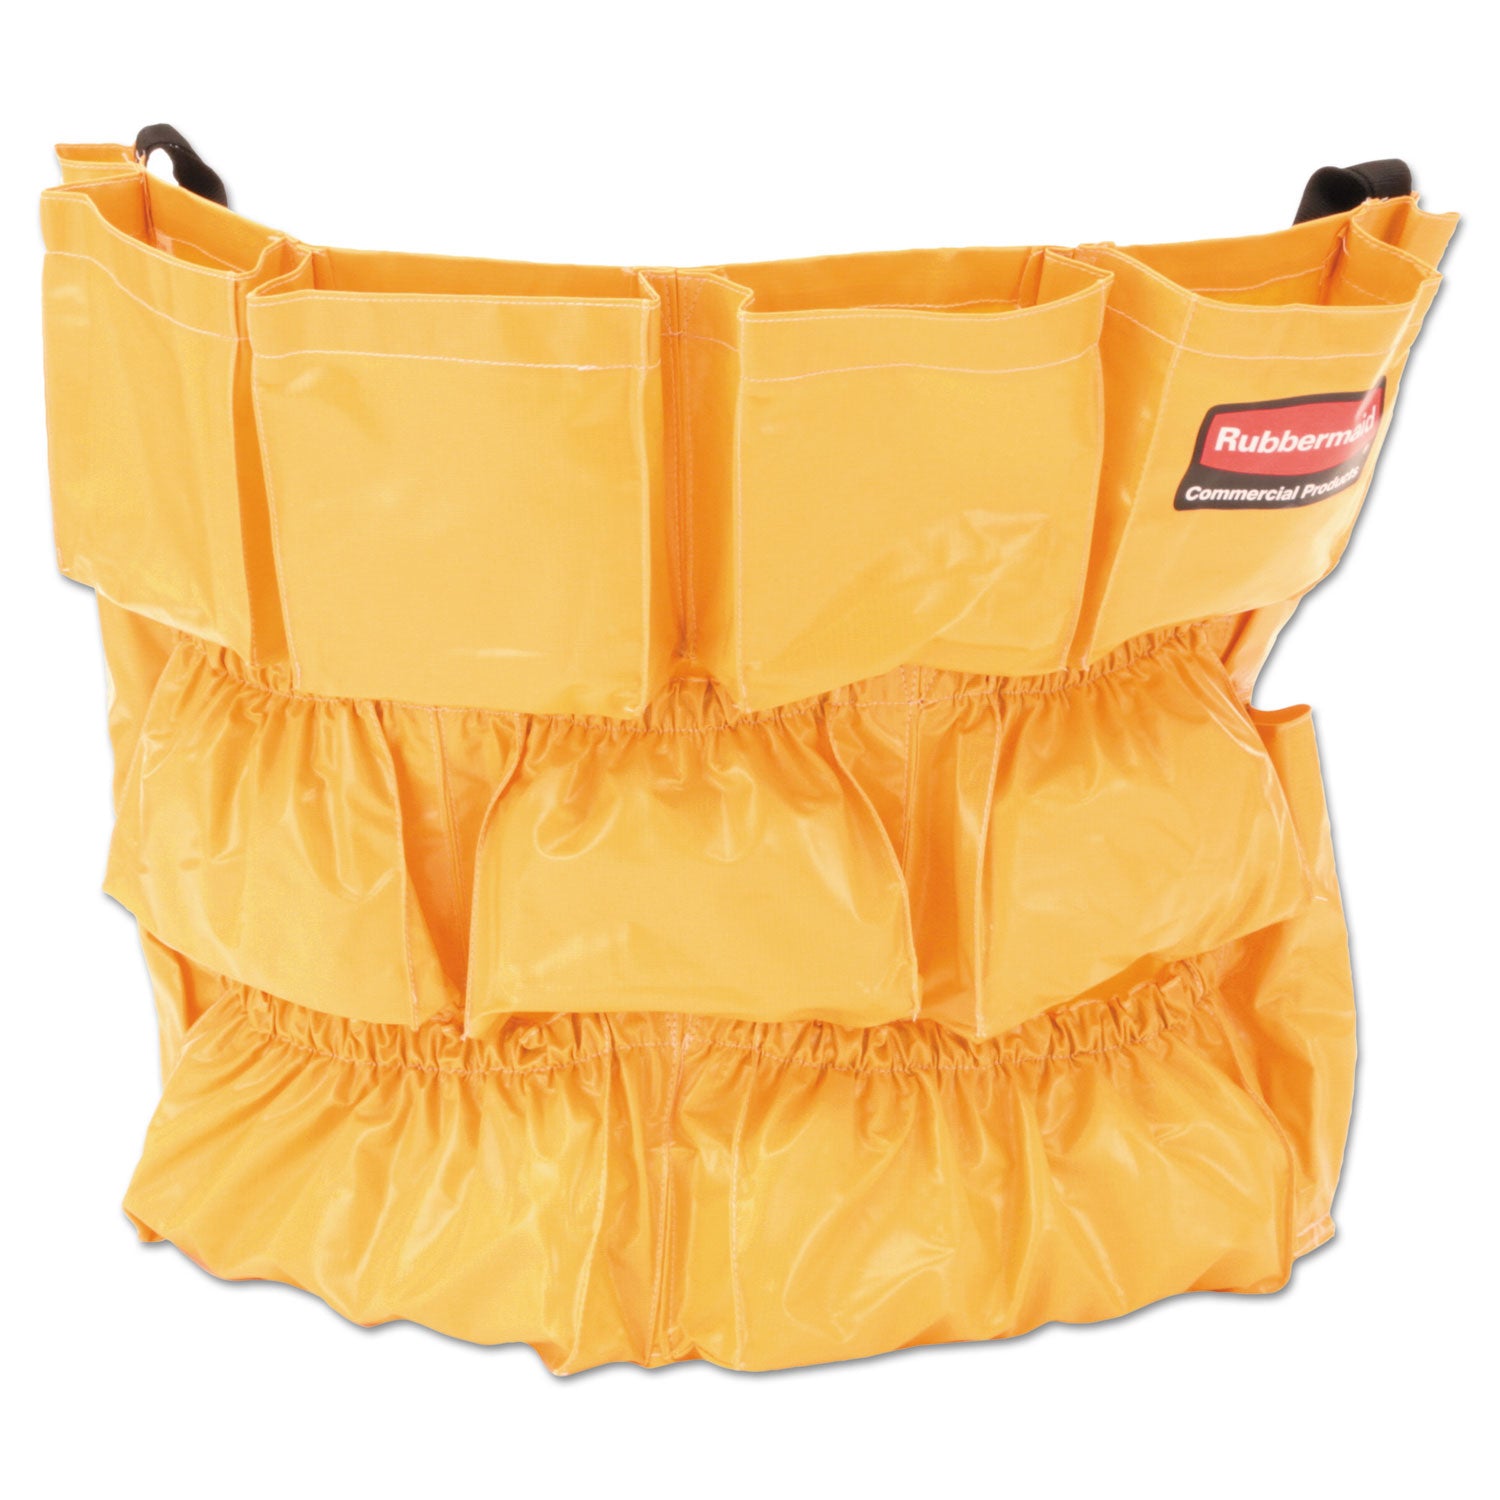 Brute Caddy Bag, 12 Compartments, Yellow - 